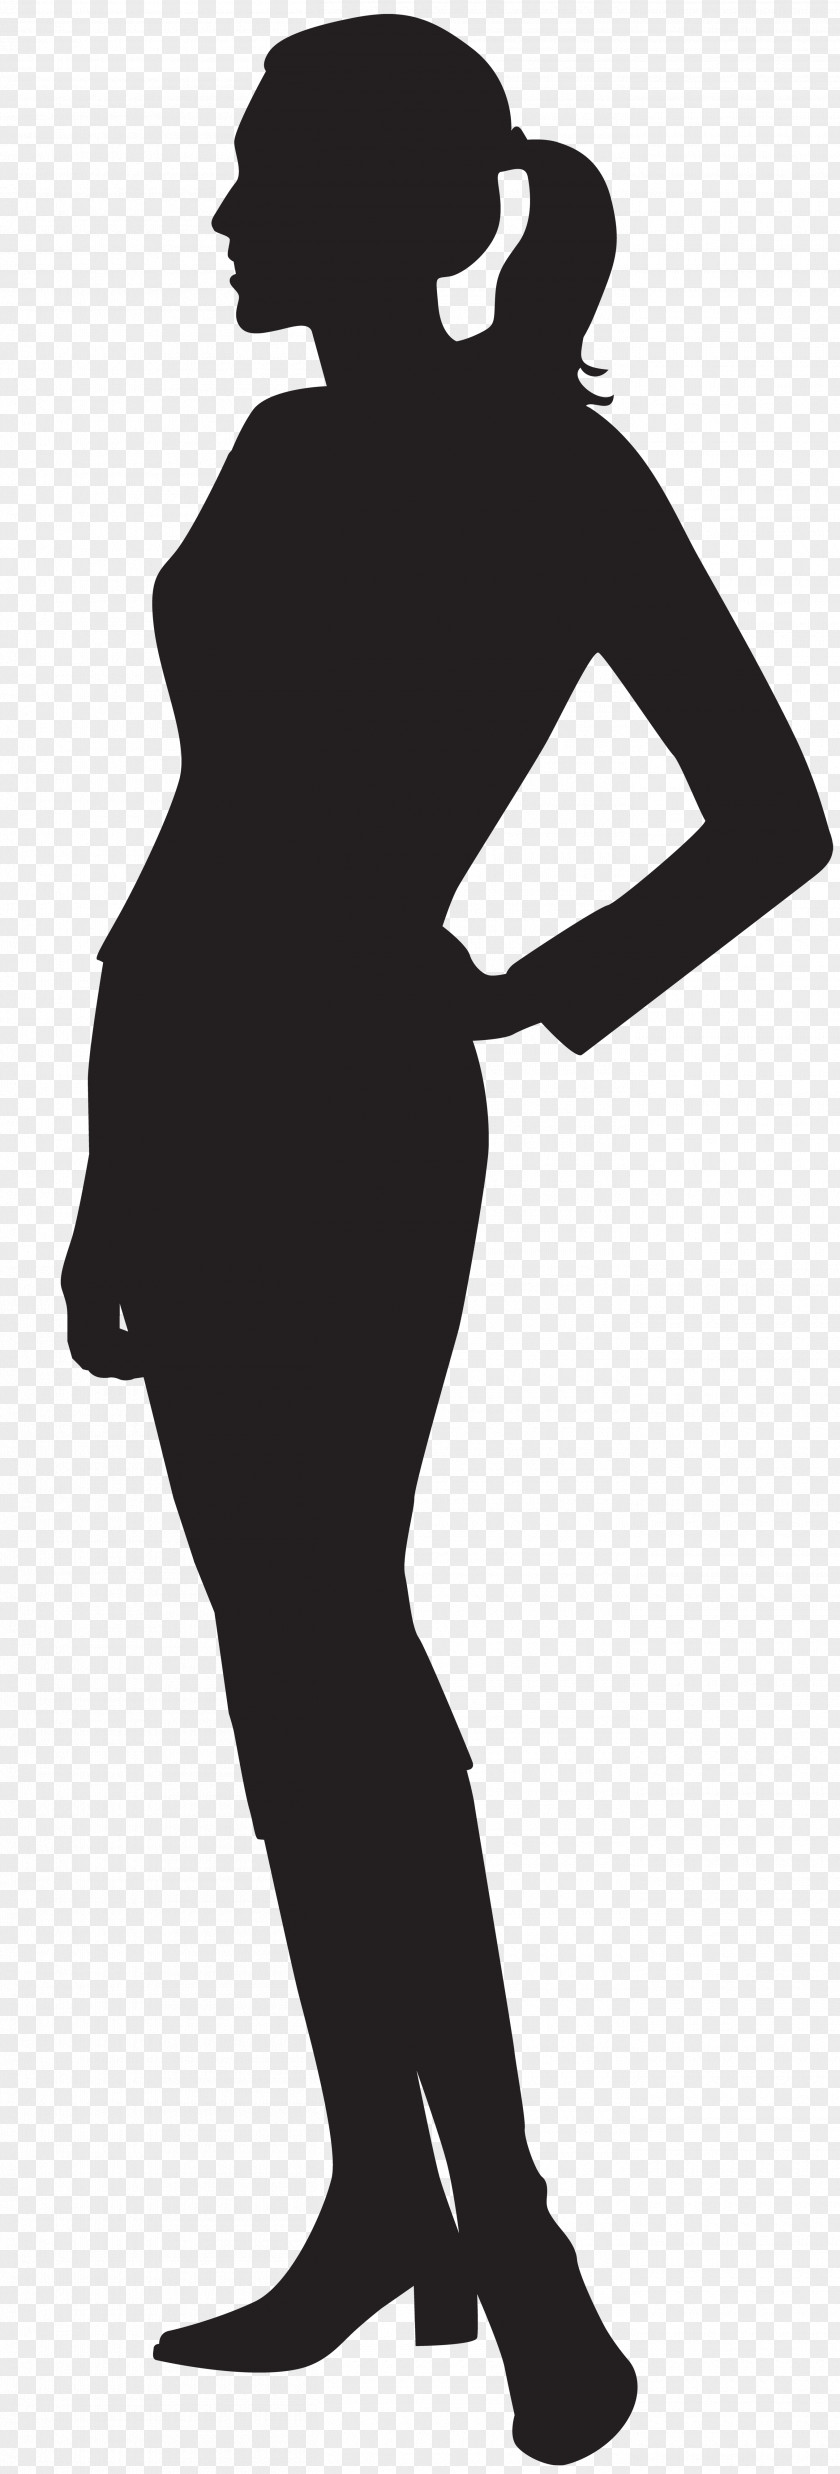 Female Silhouette Clip Art Image PNG